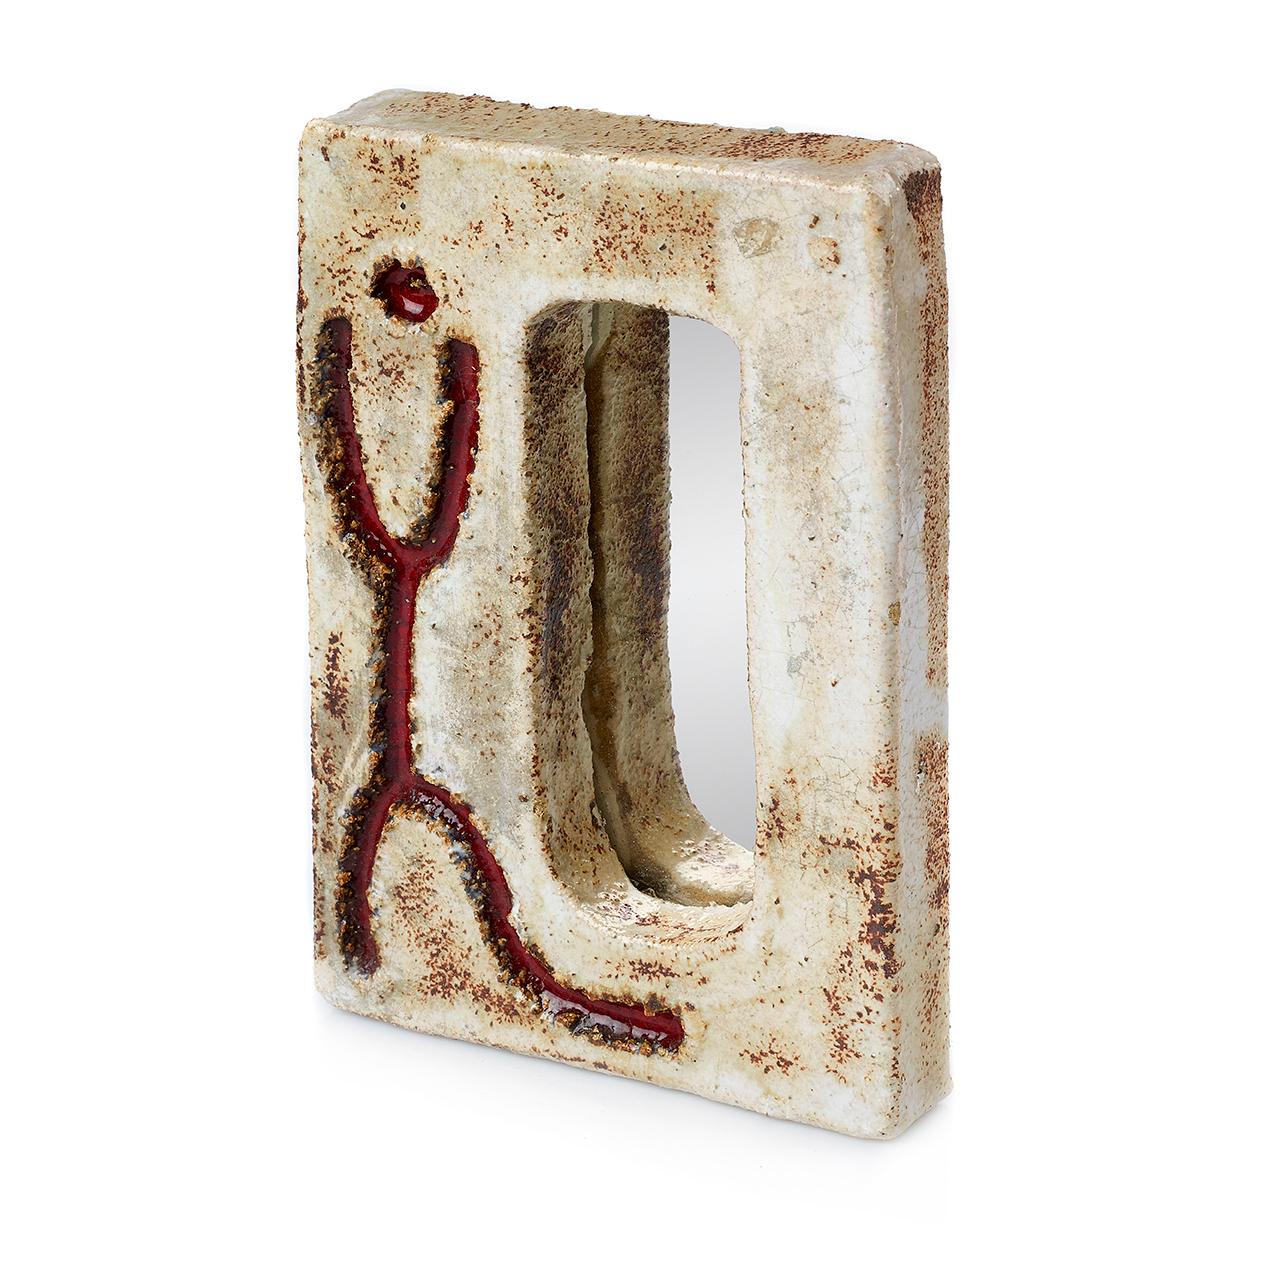 A sculptural ceramic mirror from France circa 1950 by Galerie Pallisy of  Vallauris on the French Riviera. Featuring a vibrant milky glaze and a red incised abstract dancing figure. Of the same era as Juliette Derel. 

Instagram @ahareintheforest 